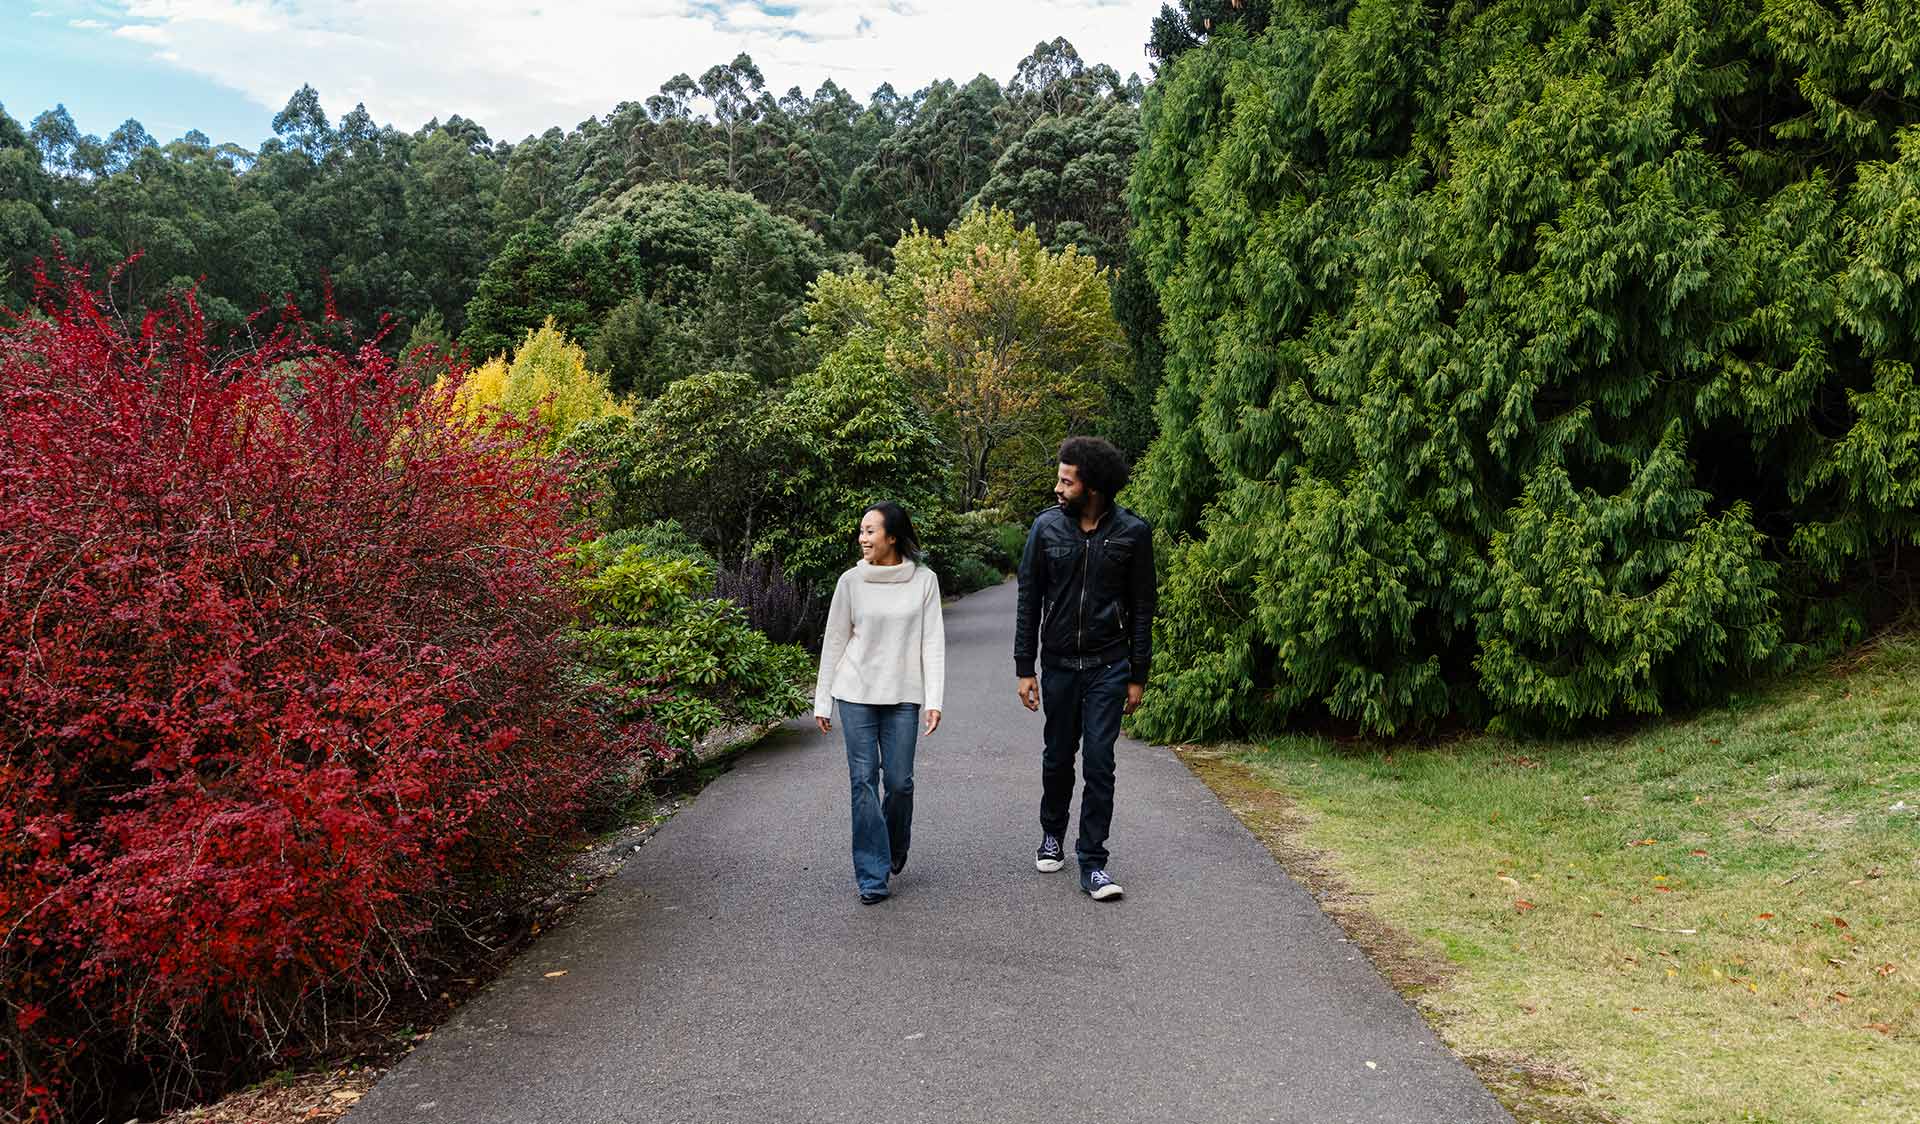 A man with an afro wearing a leather jacket and woman wearing a cream knitted jumper walk past a tree with splendid autumn leaves.